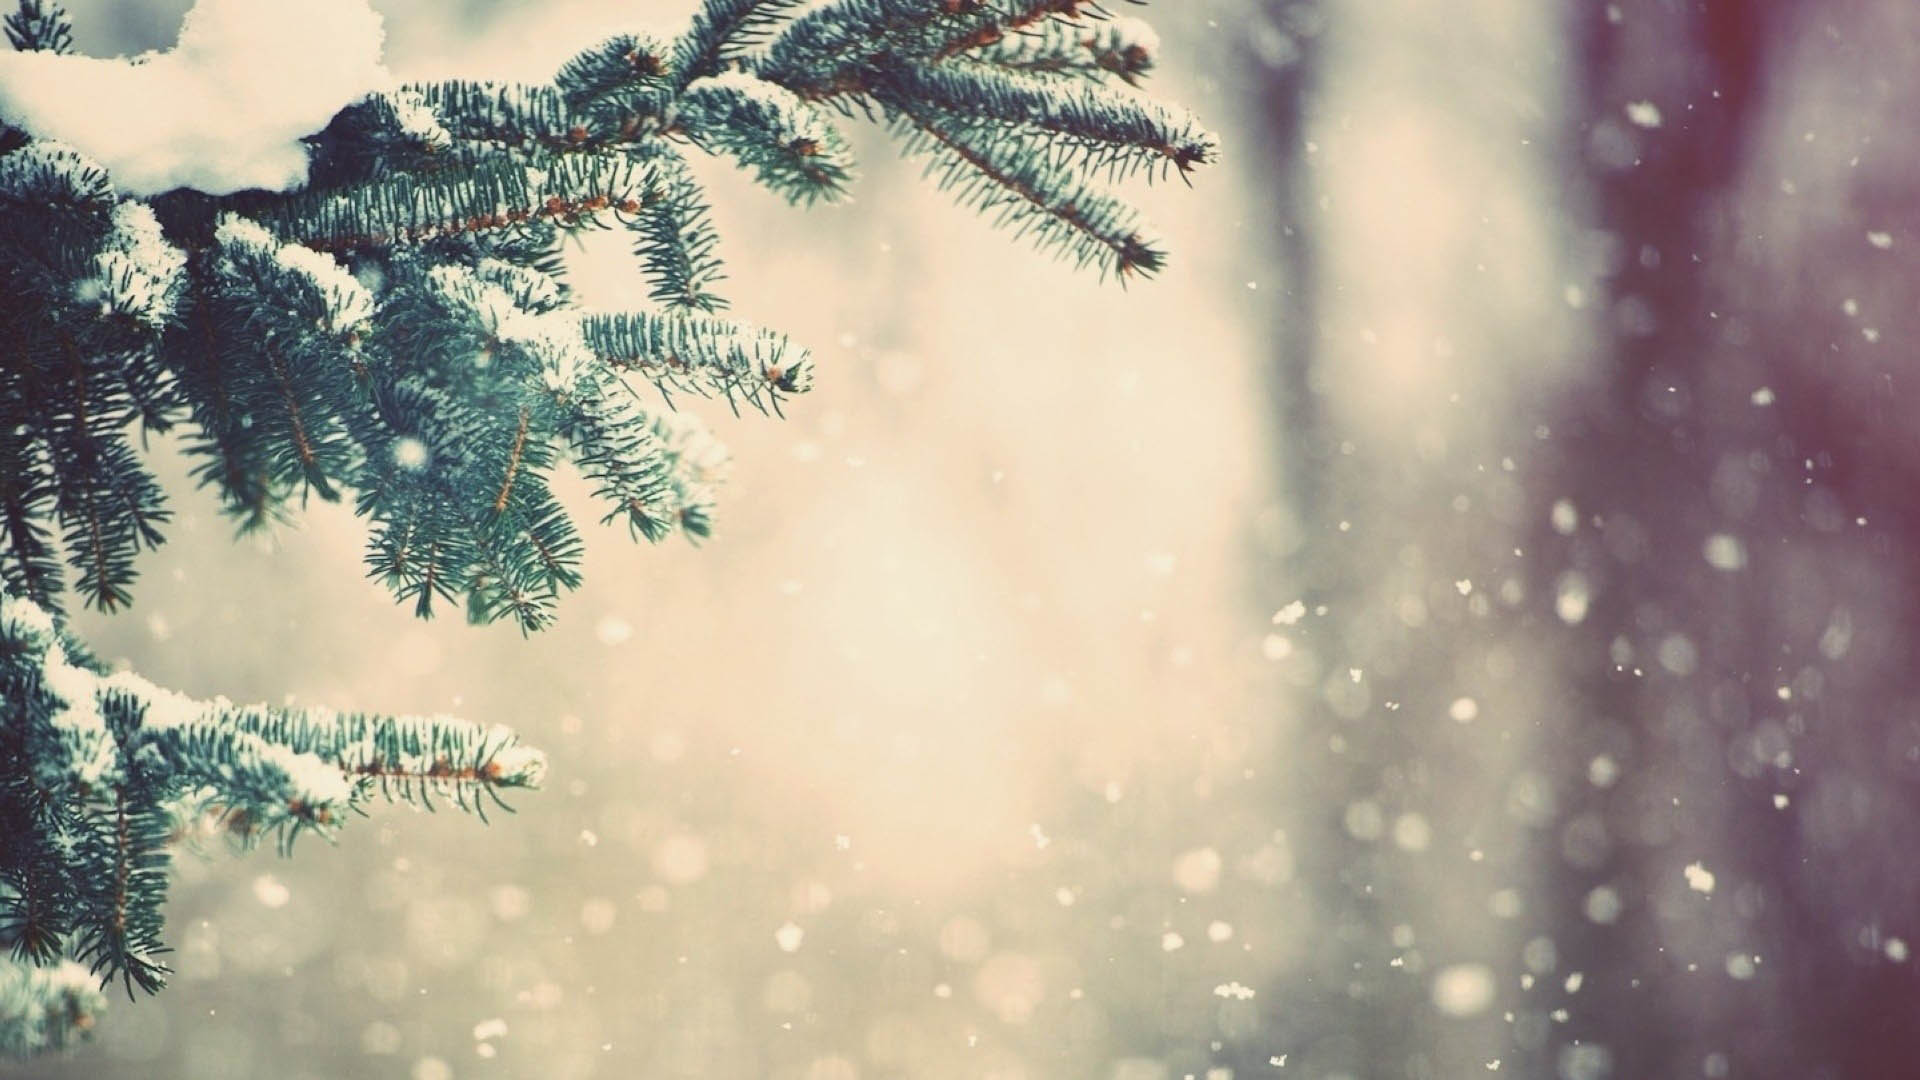 Snow on Pine Tree Cool Wallpapers